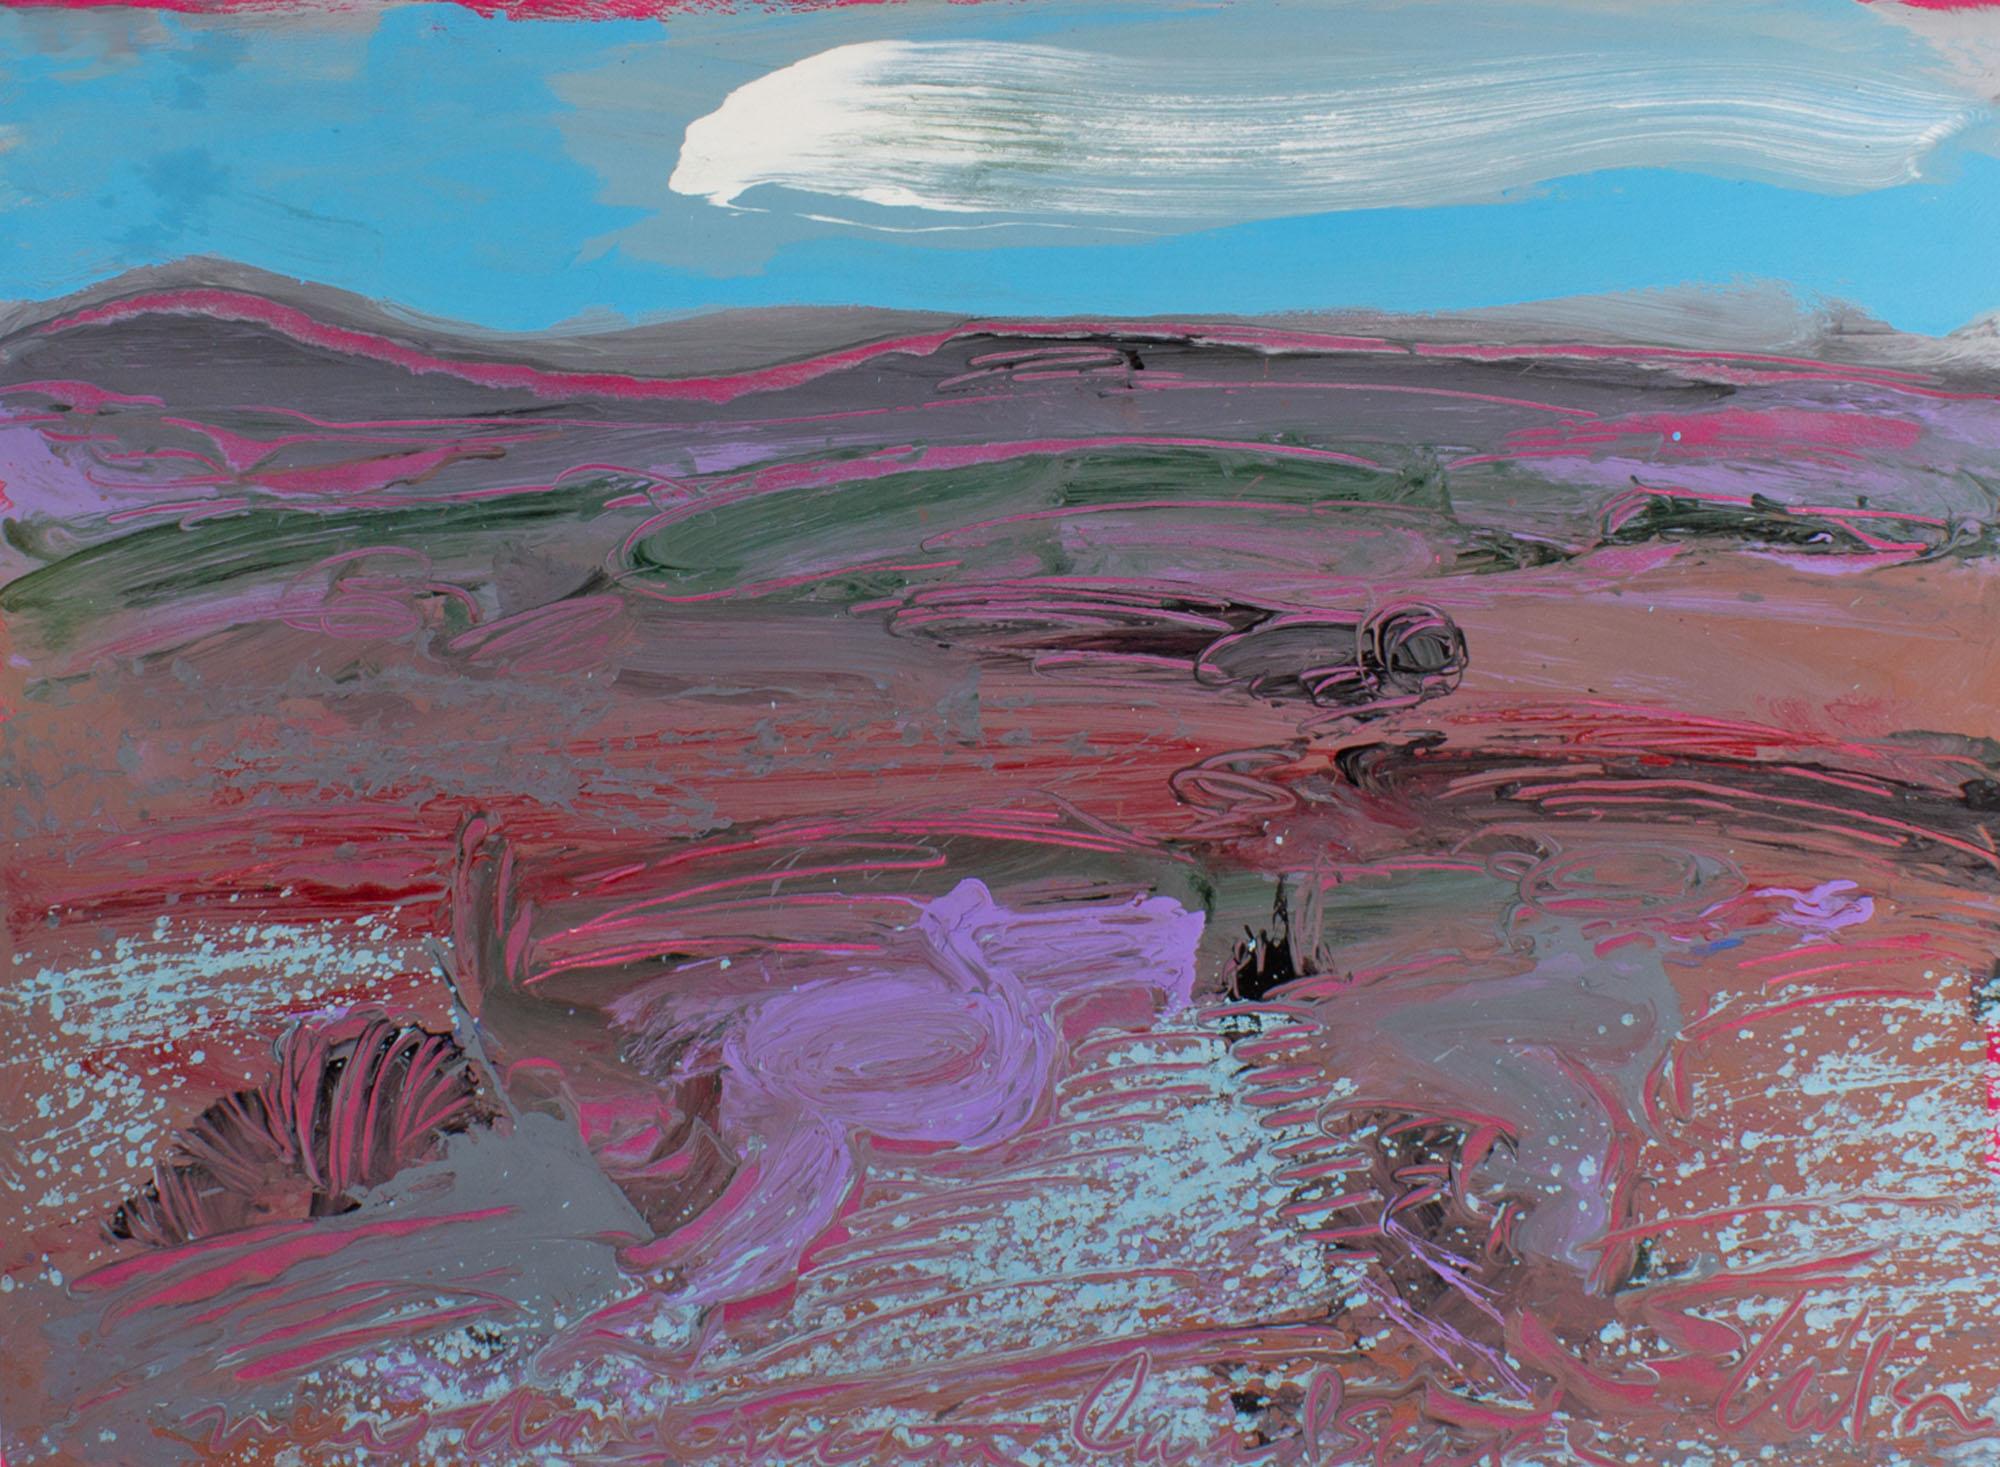 A 1980s abstract acrylic on paper mountainous landscape painting titled New American Landscape by American artist Harry Hilson (1935-2004). Gestural lines come together to create a vibrant abstract landscape with pinkish brown distant mountains in